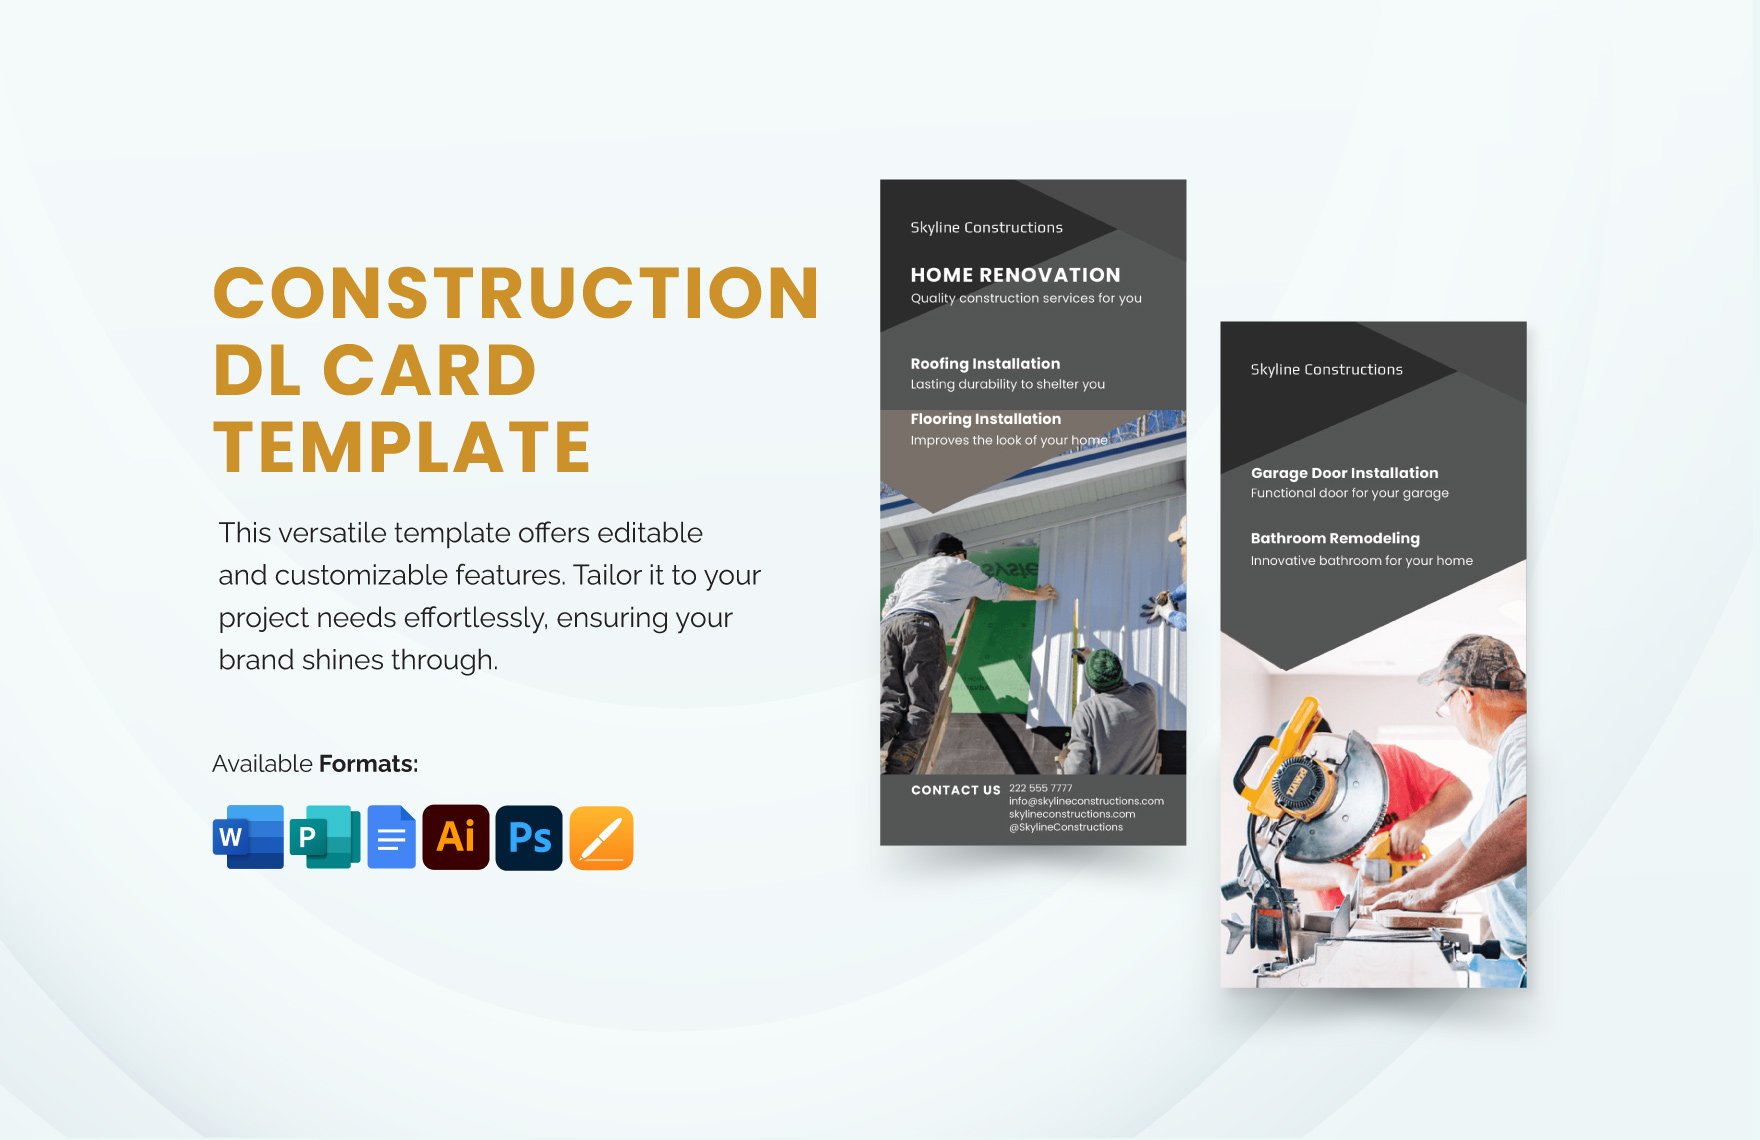 Construction DL Card Template